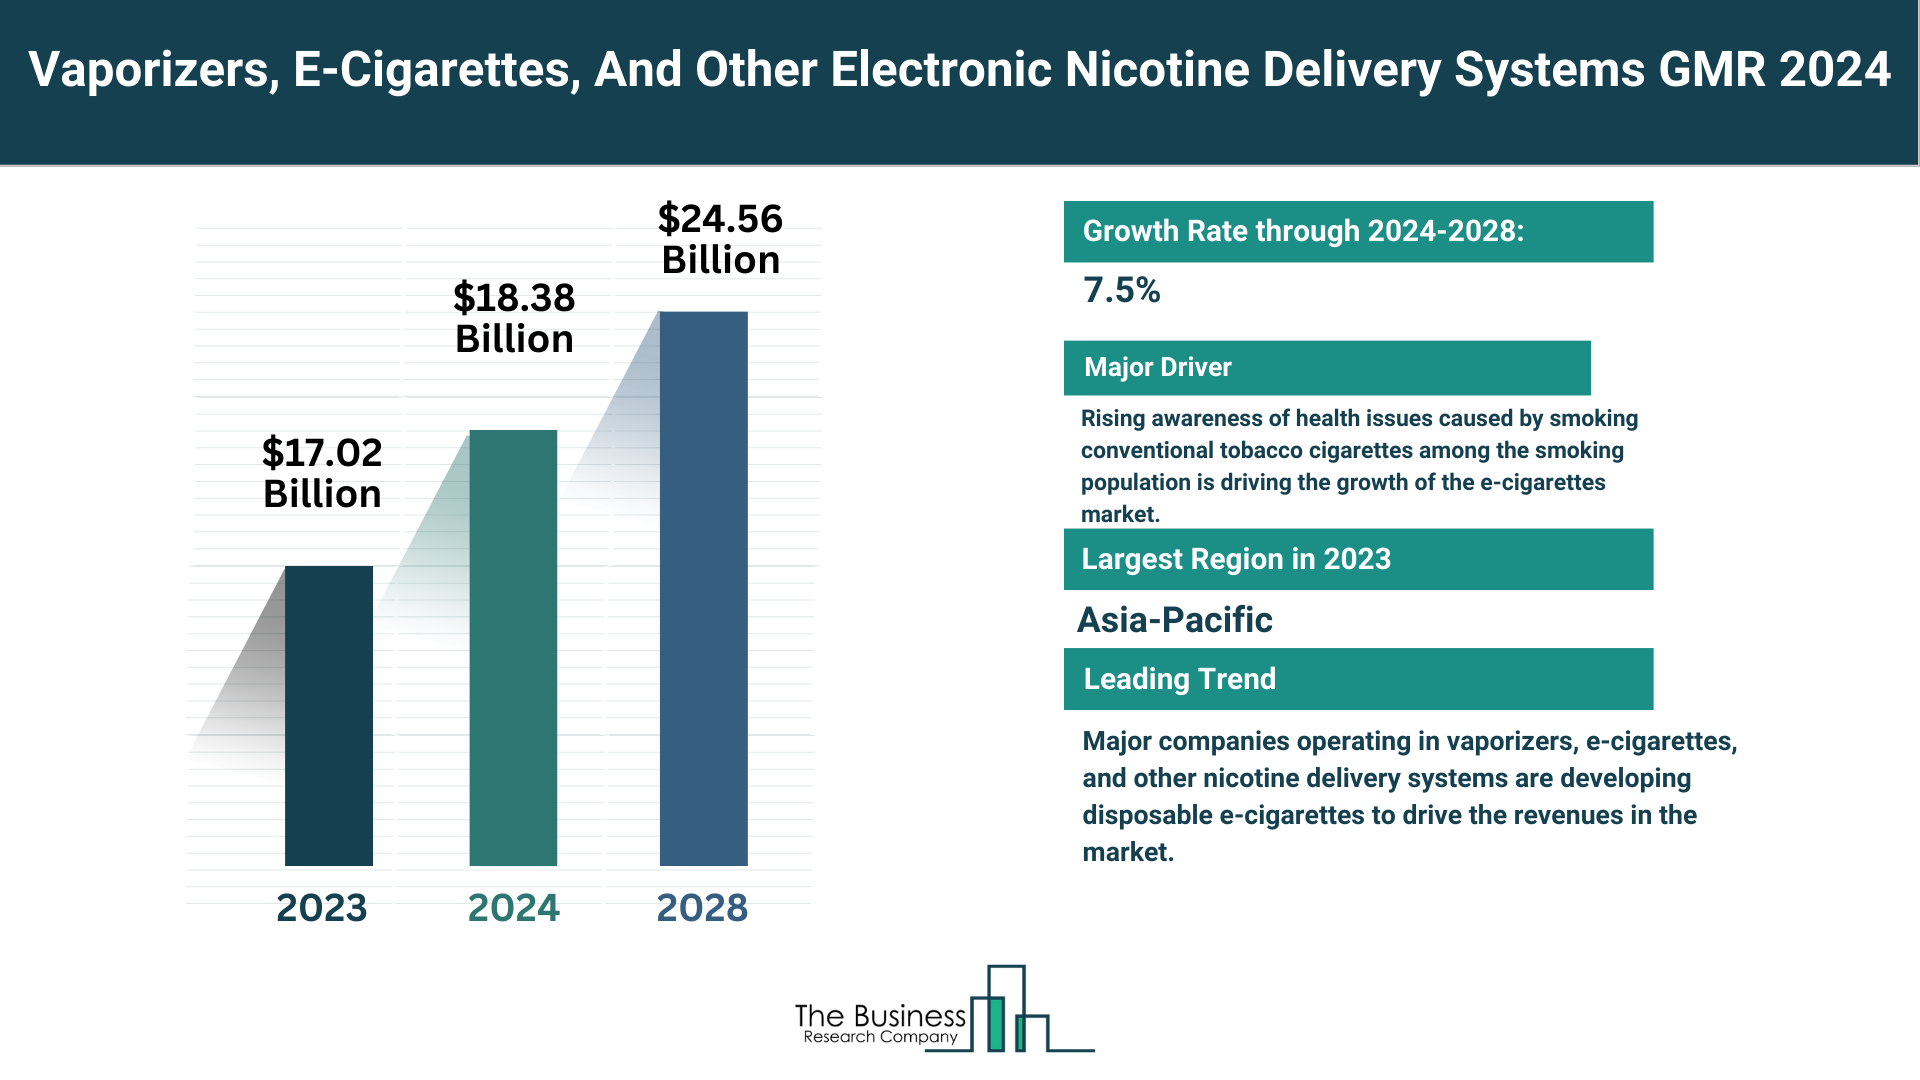 Global Vaporizers, E-Cigarettes, And Other Electronic Nicotine Delivery Systems (ENDS) Market